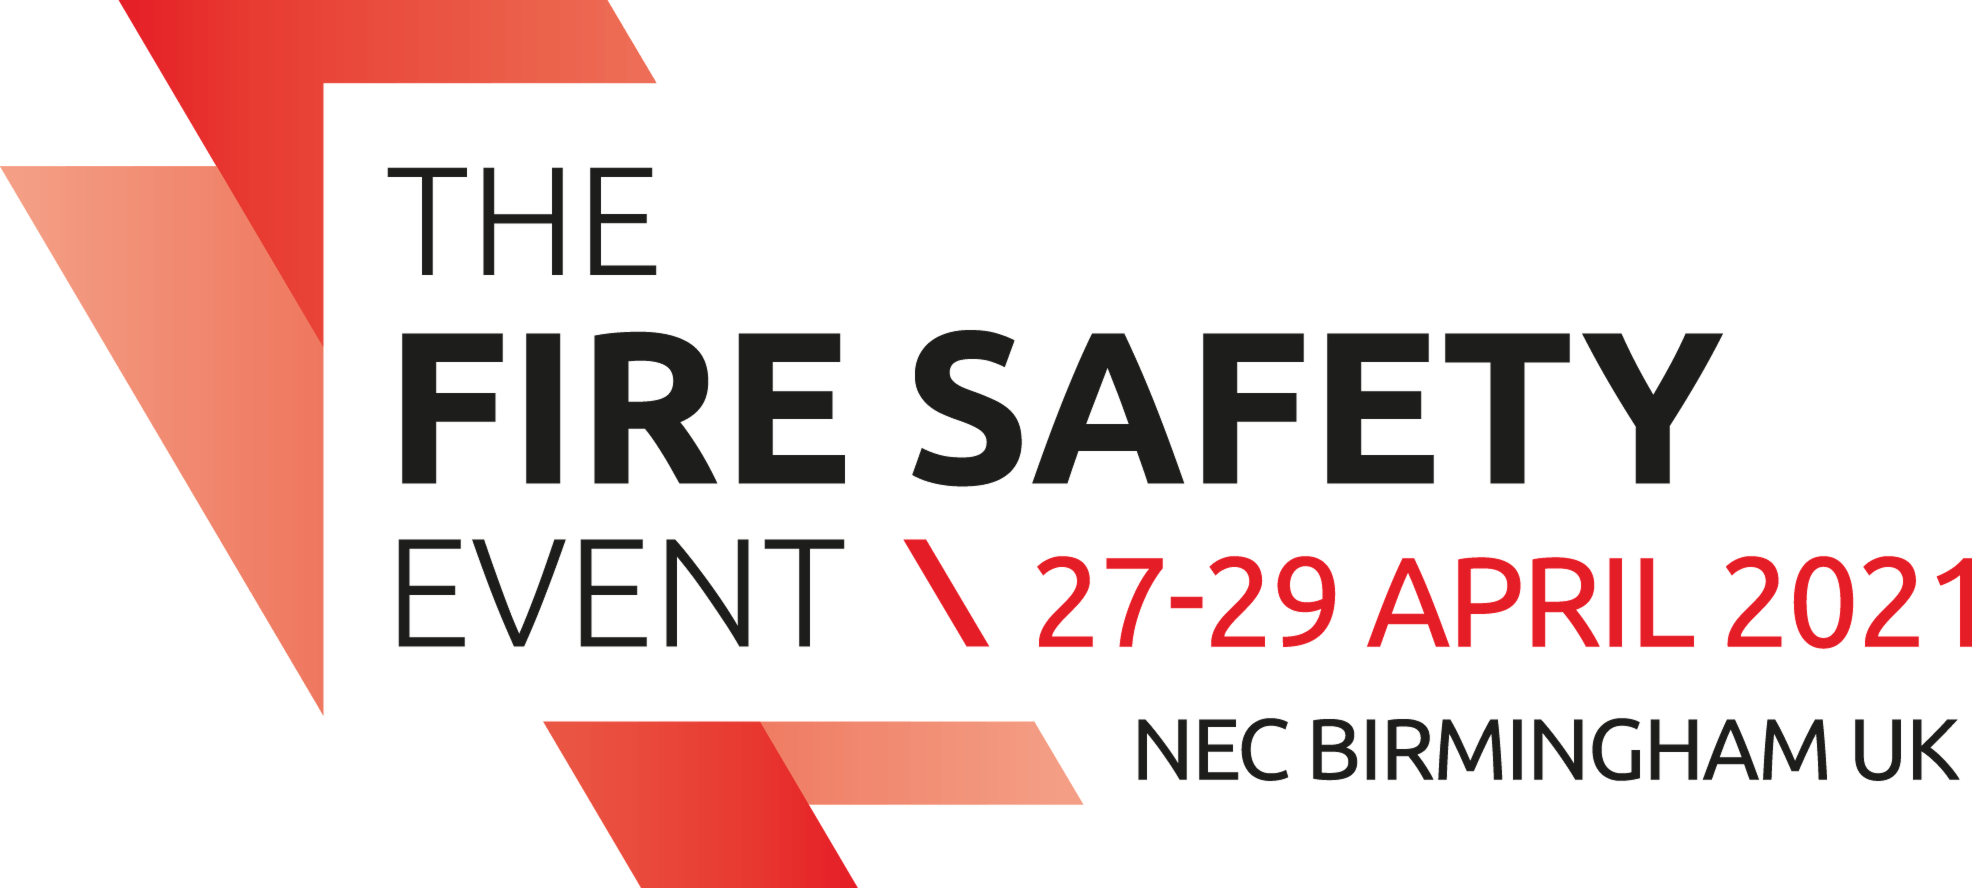 Fire Safety event logo